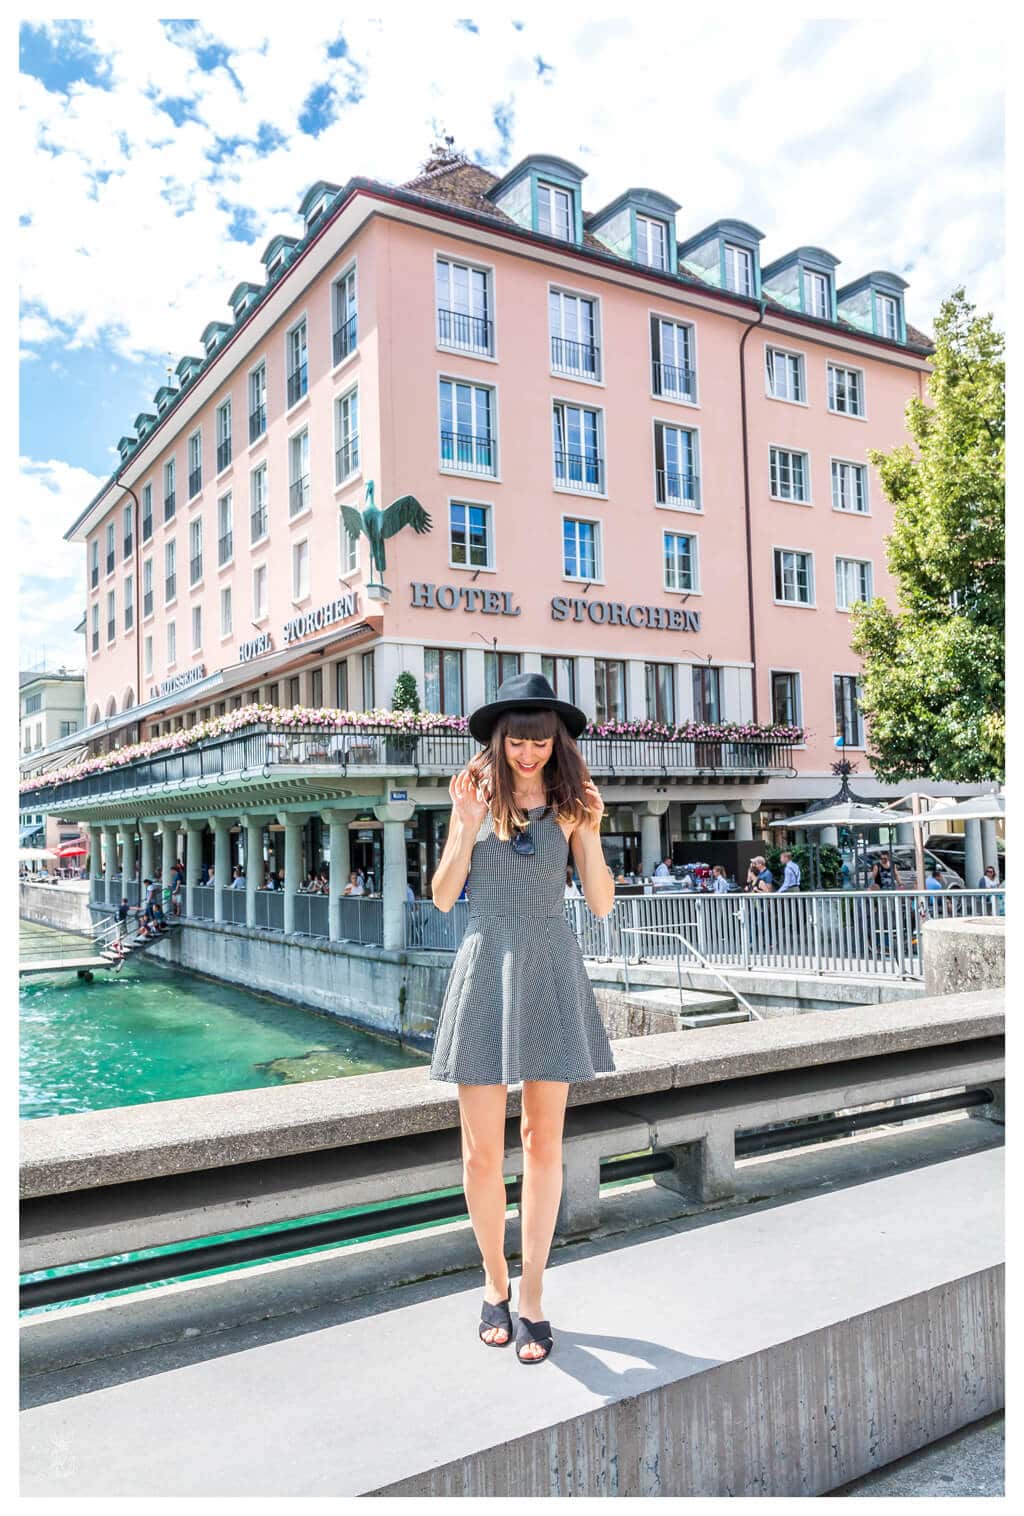 Travel Diaries : A Local Guide To Weekend in Zurich | Travel destinations